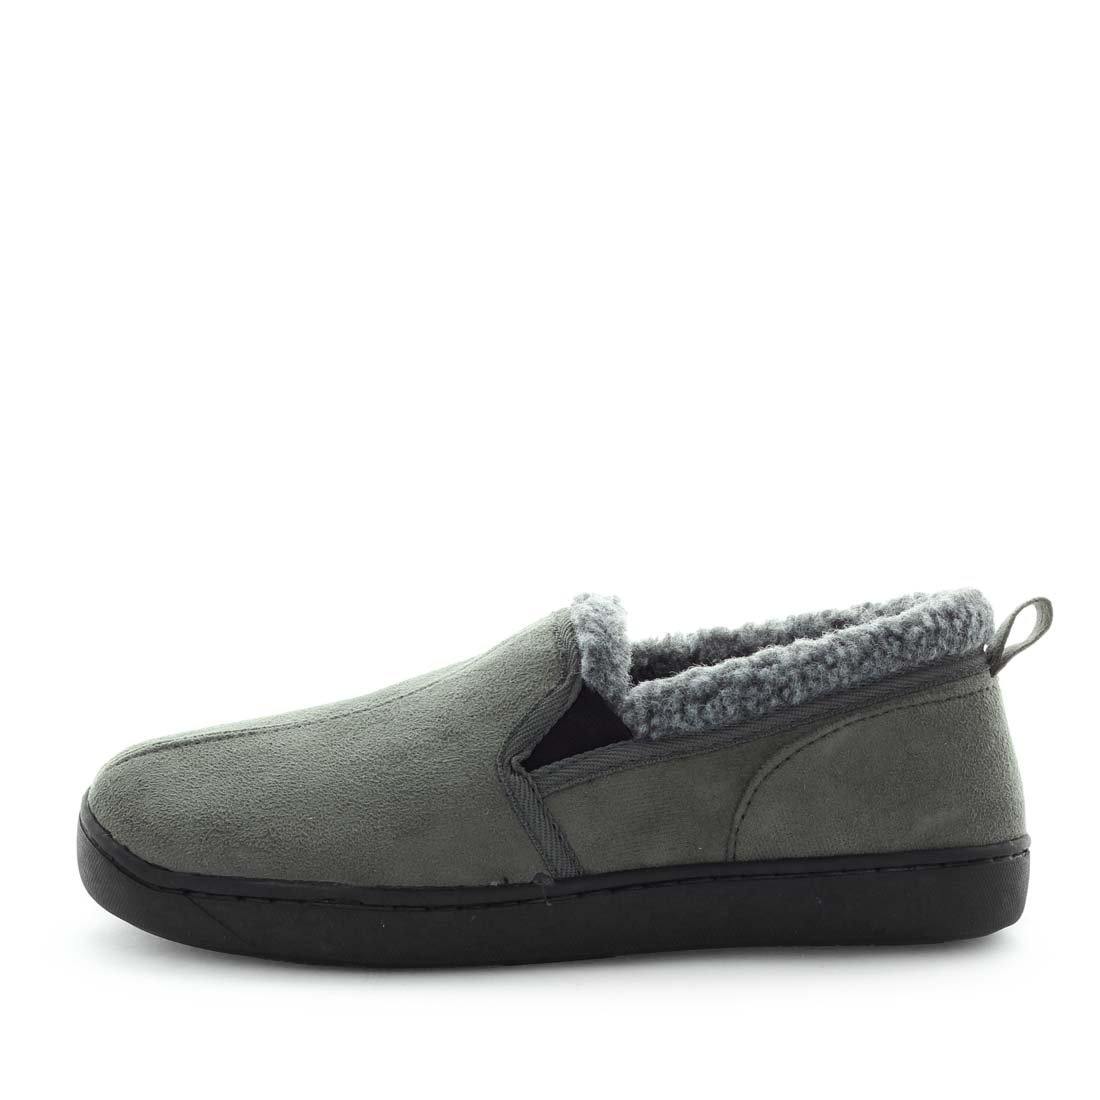 Classic mens slipper, Eliu by panda slippers. A grey/charcoal grey slip on style slipper with soft materials and comfy fit design for indoor wear. Showing a faux fur trimming and a non slip sole.x